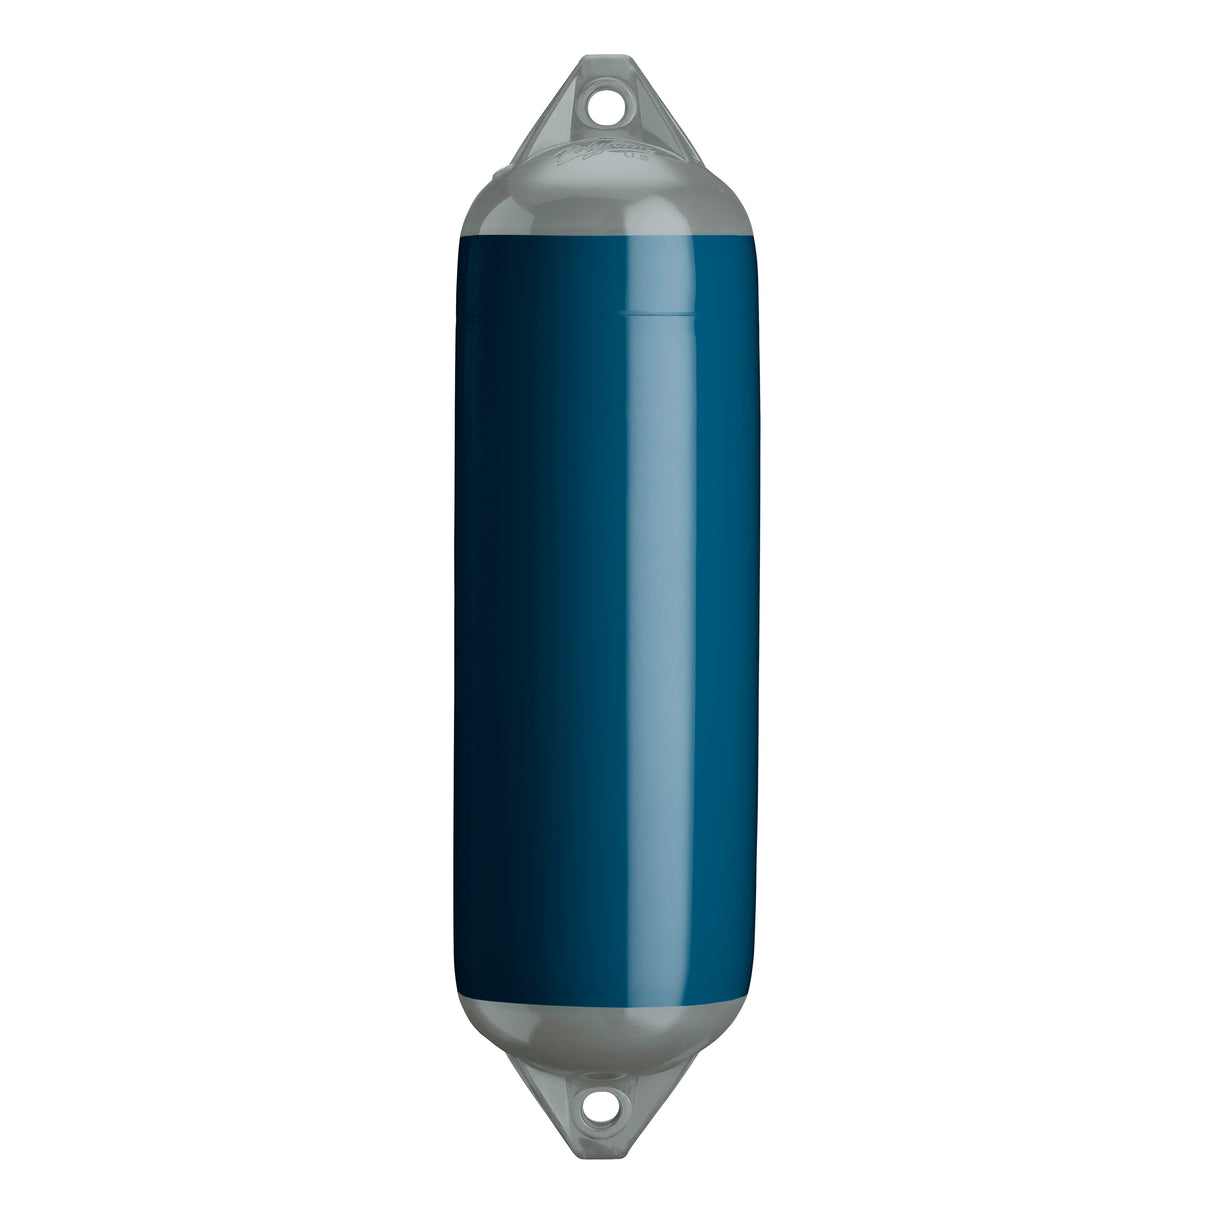 Catalina Blue boat fender with Grey-Top, Polyform F-3